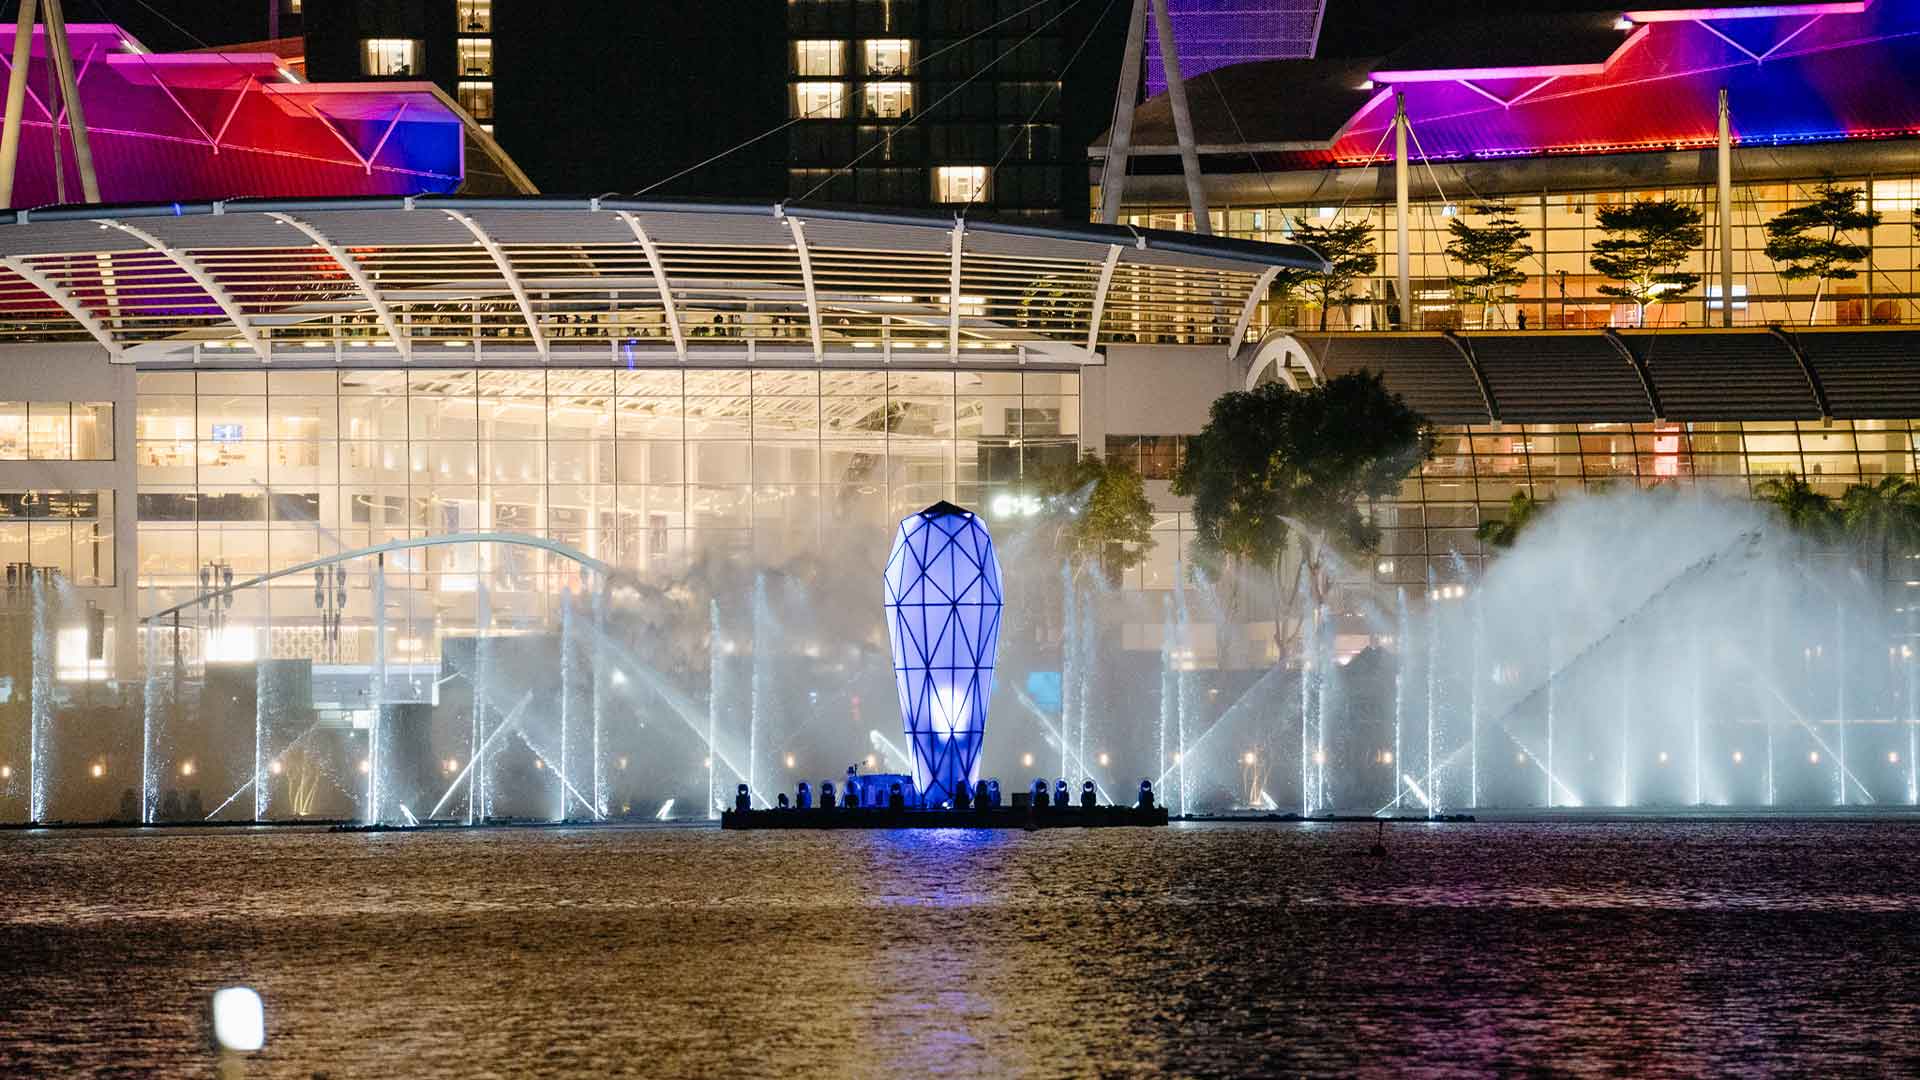 View of the blue and purple light and water show from the Event Plaza, Marina Bay Sands during The Eras Tour